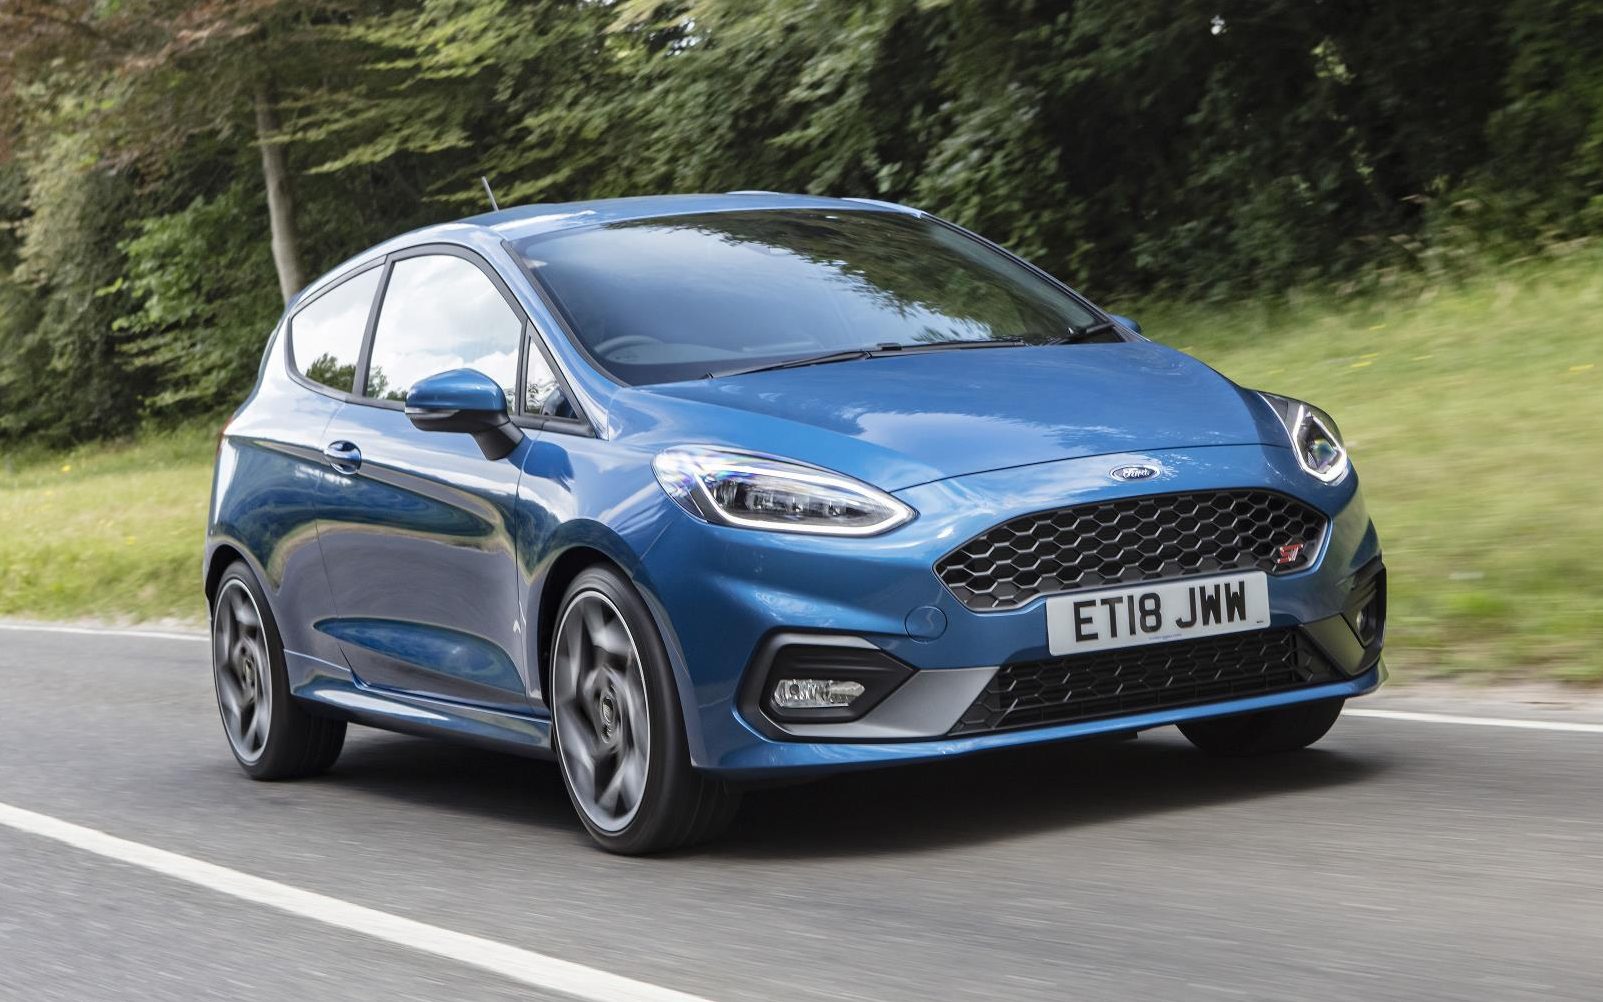 2019 Ford Fiesta ST review: still the best small hot hatchback on the road